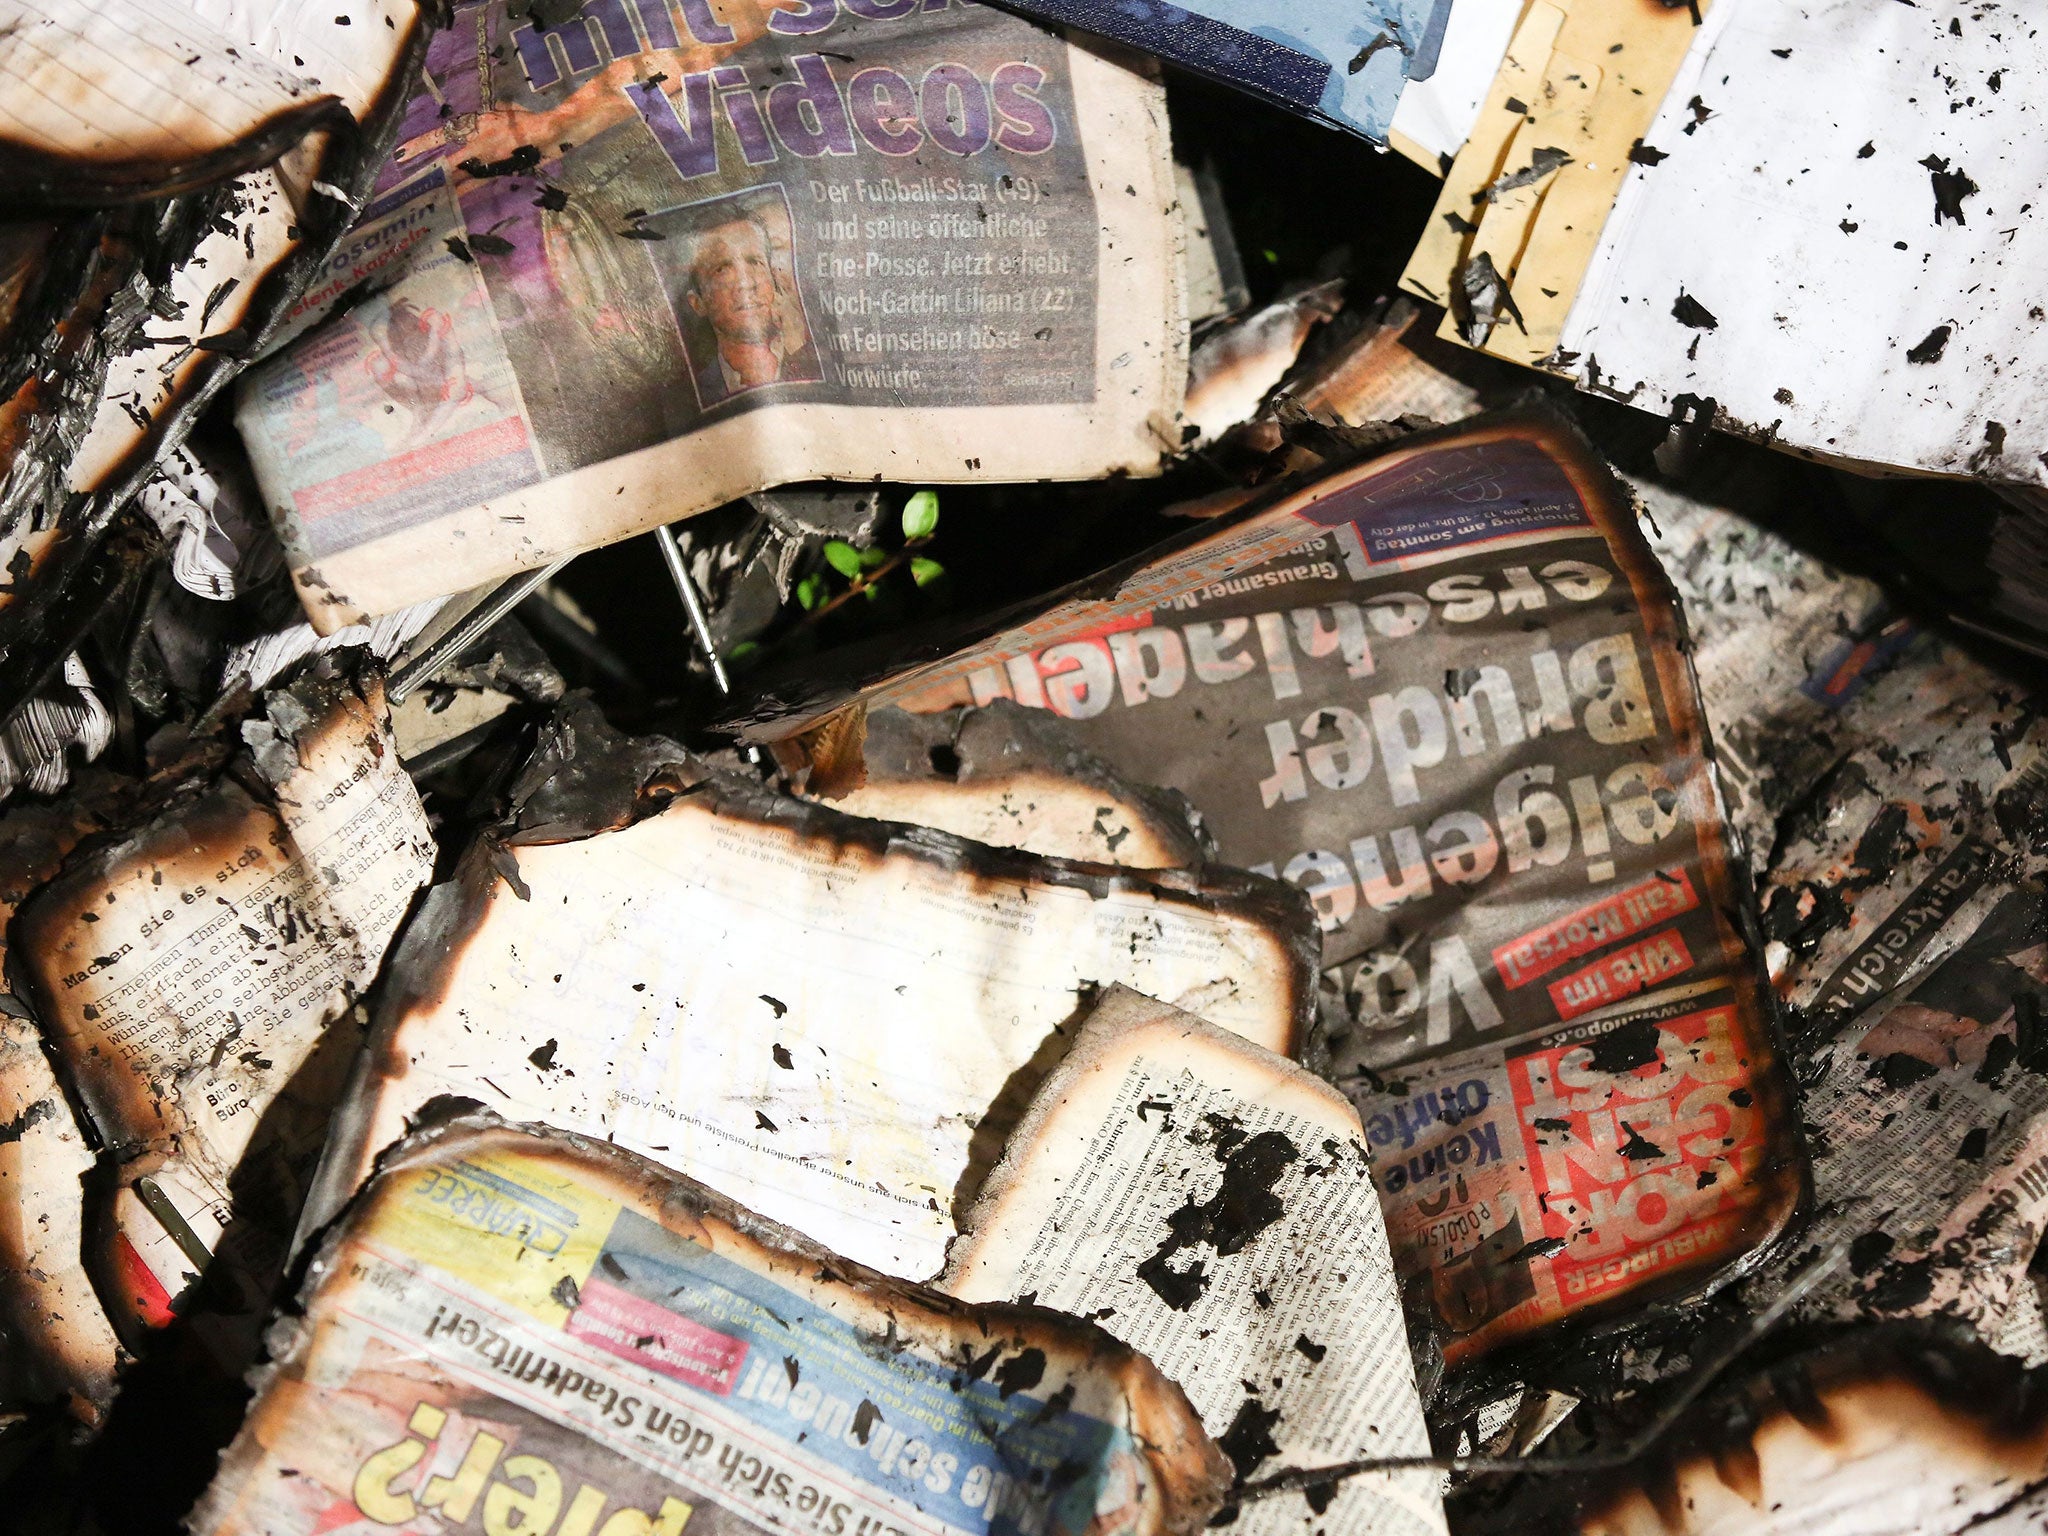 Fire-damaged newspapers at the scene of an arson attack on the headquarters of German daily Hamburger Morgenpost